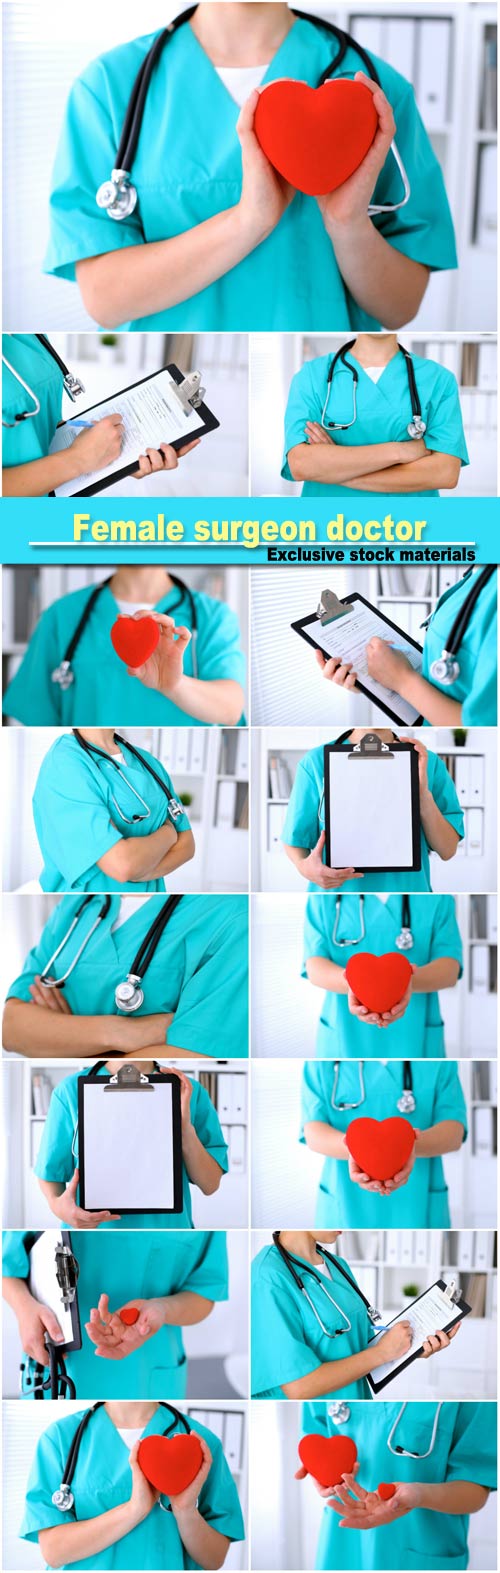 Female surgeon doctor with stethoscope holding heart